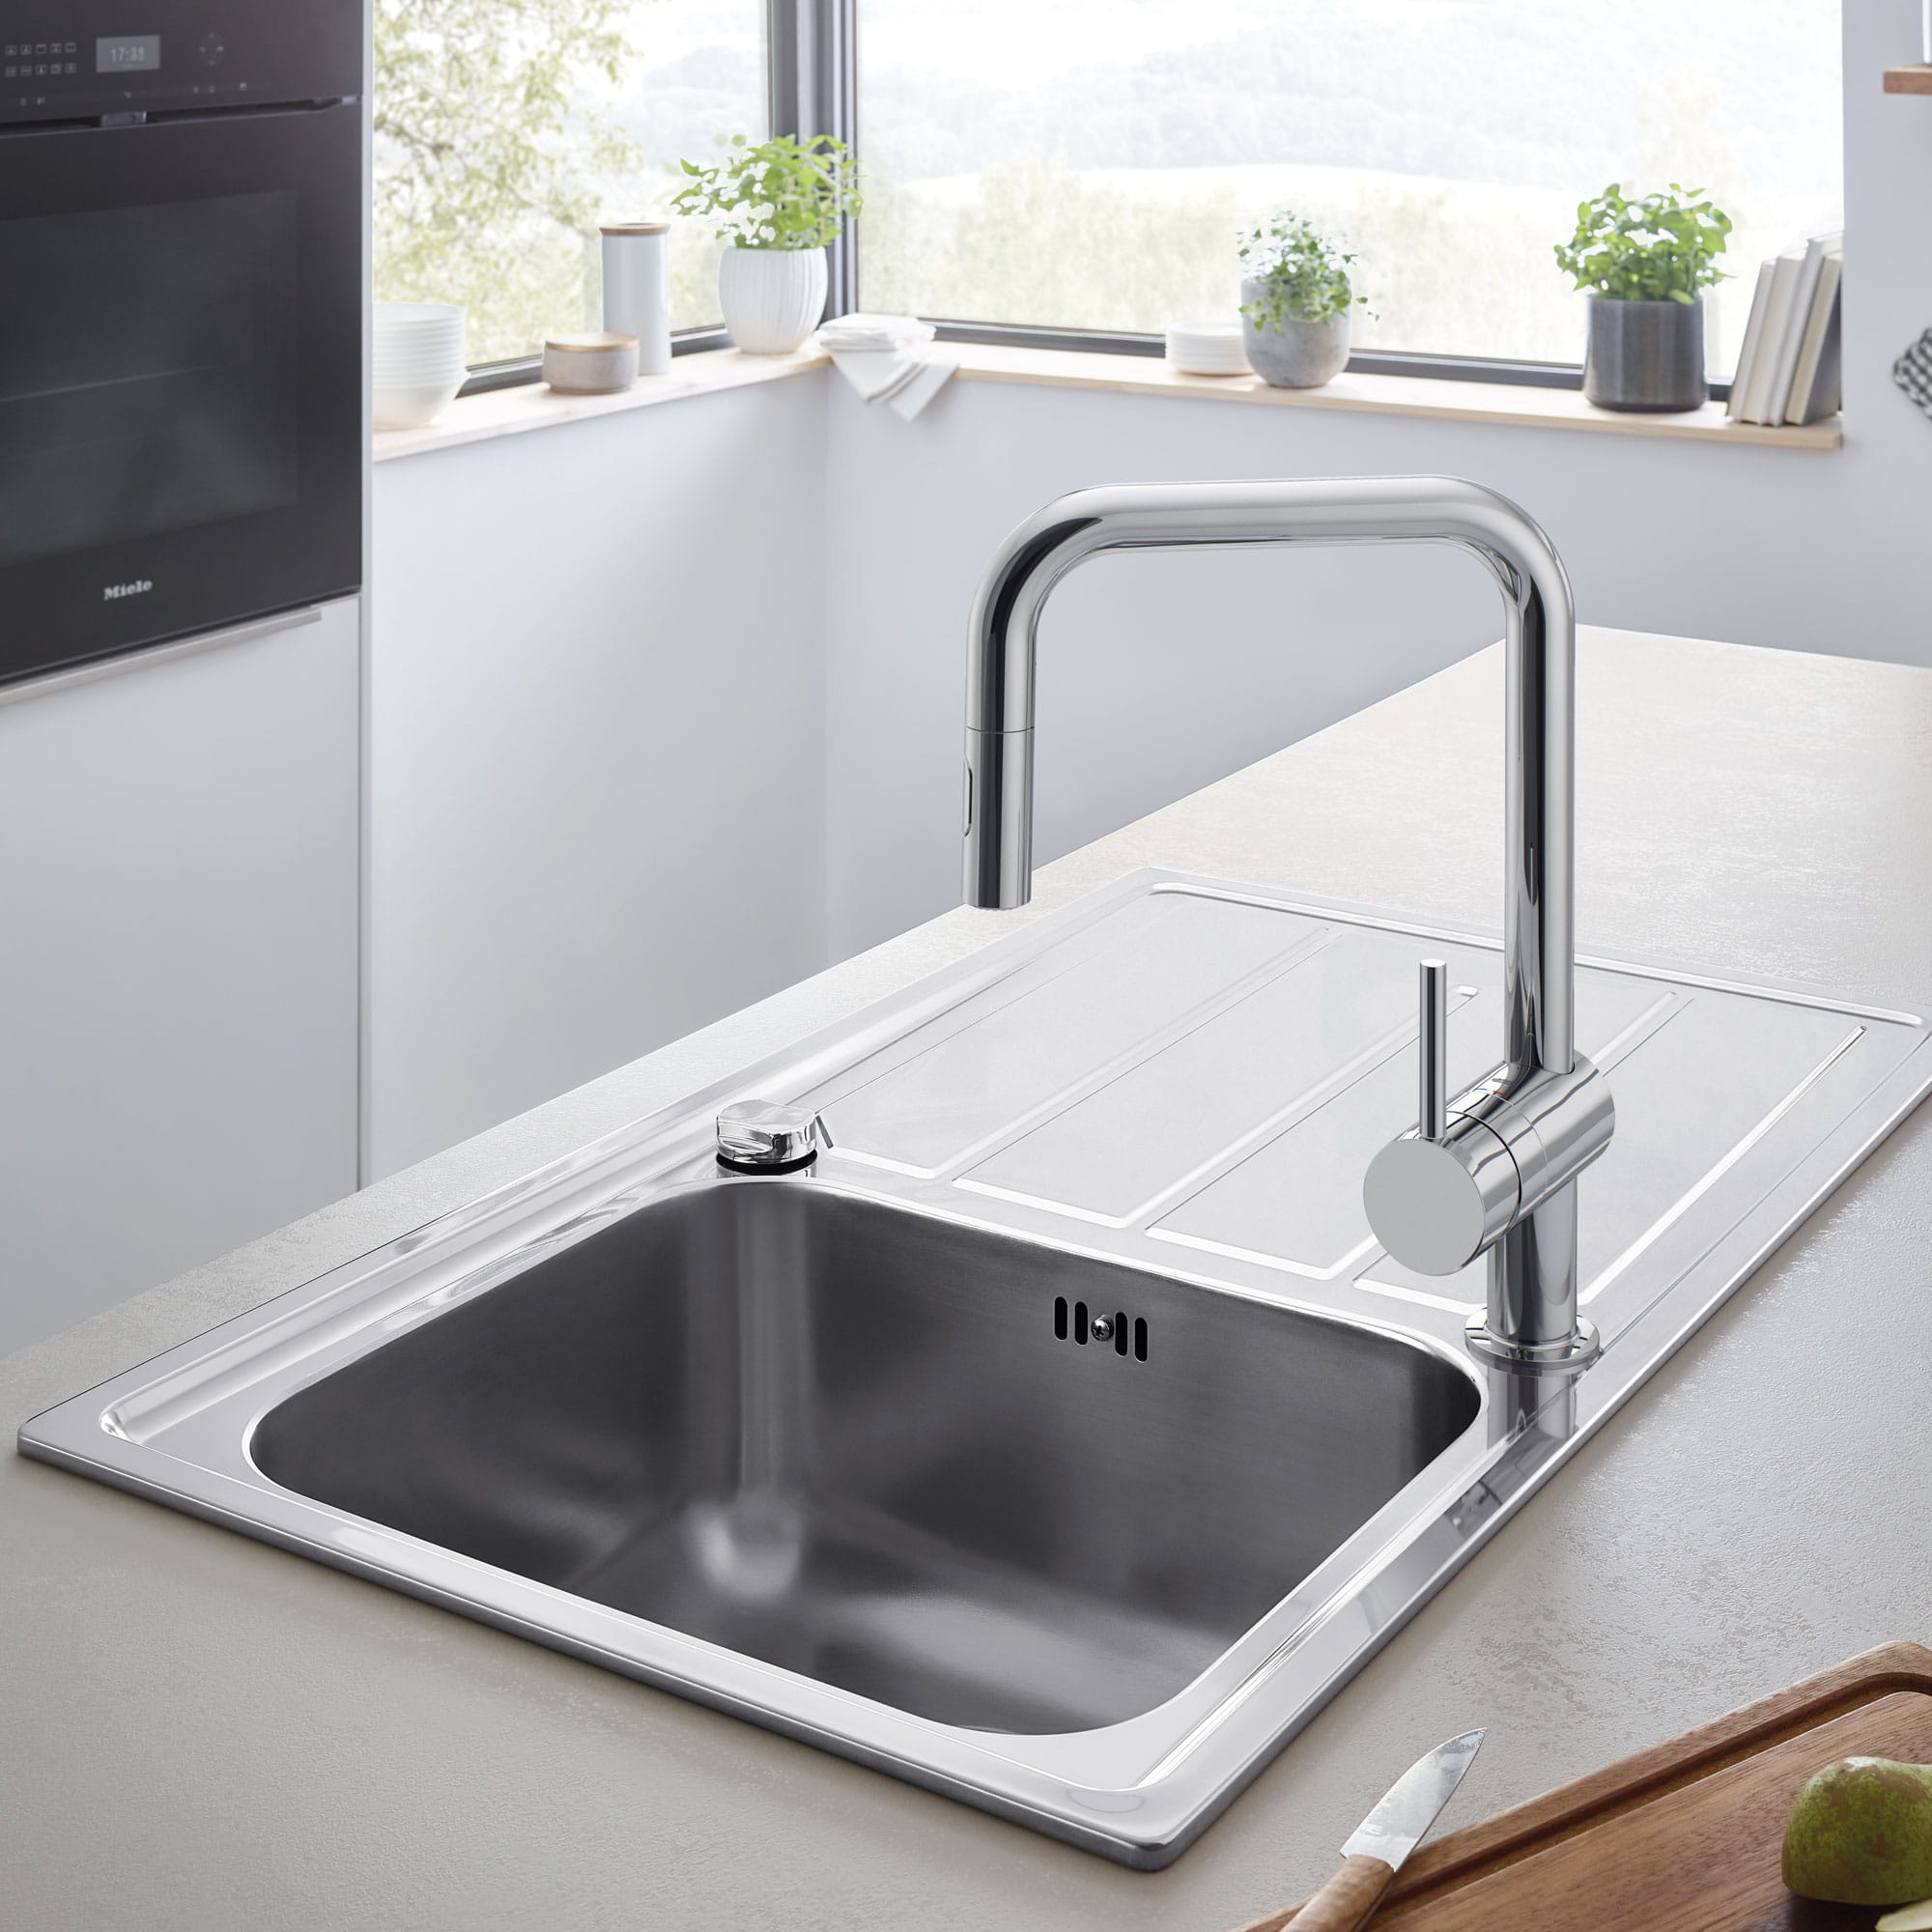 Minta Kitchen Faucet by GROHE in Kitchen Scene with Sink